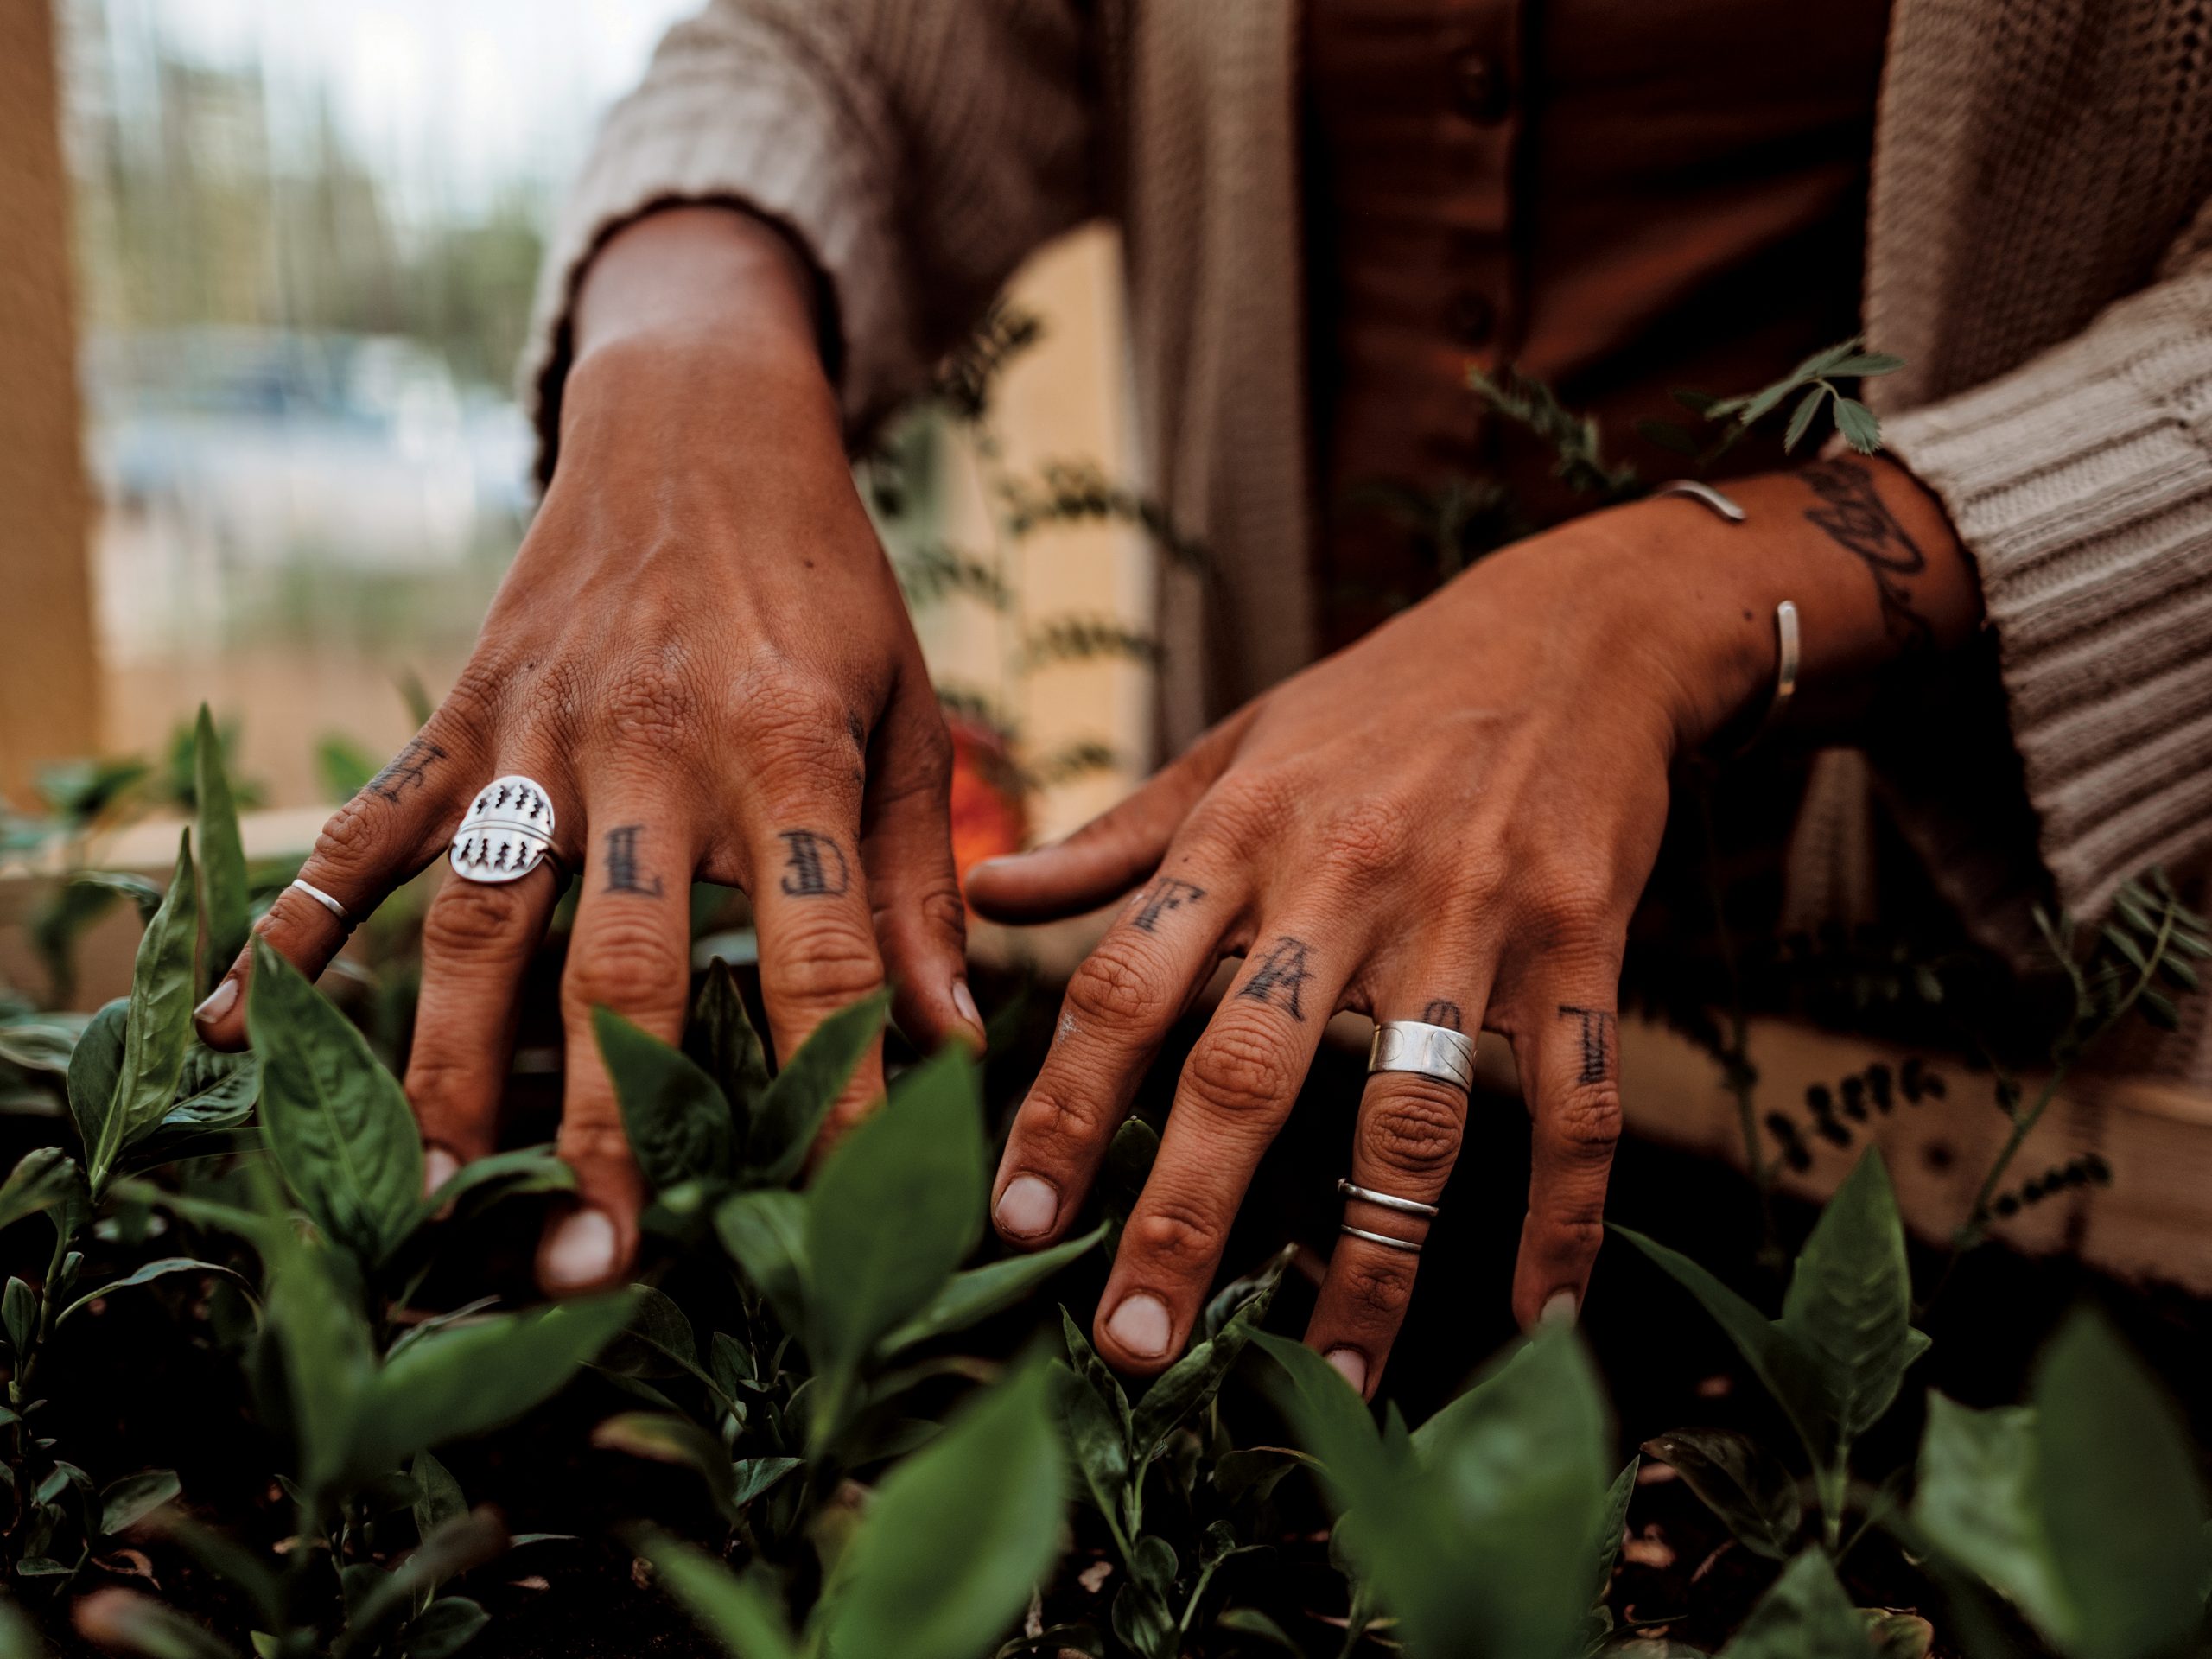 Staying connected to the land. Megan  and her partner are building a greenhouse so they can keep their hands connected to the earth in  all seasons. Photo: Kirsten Pope